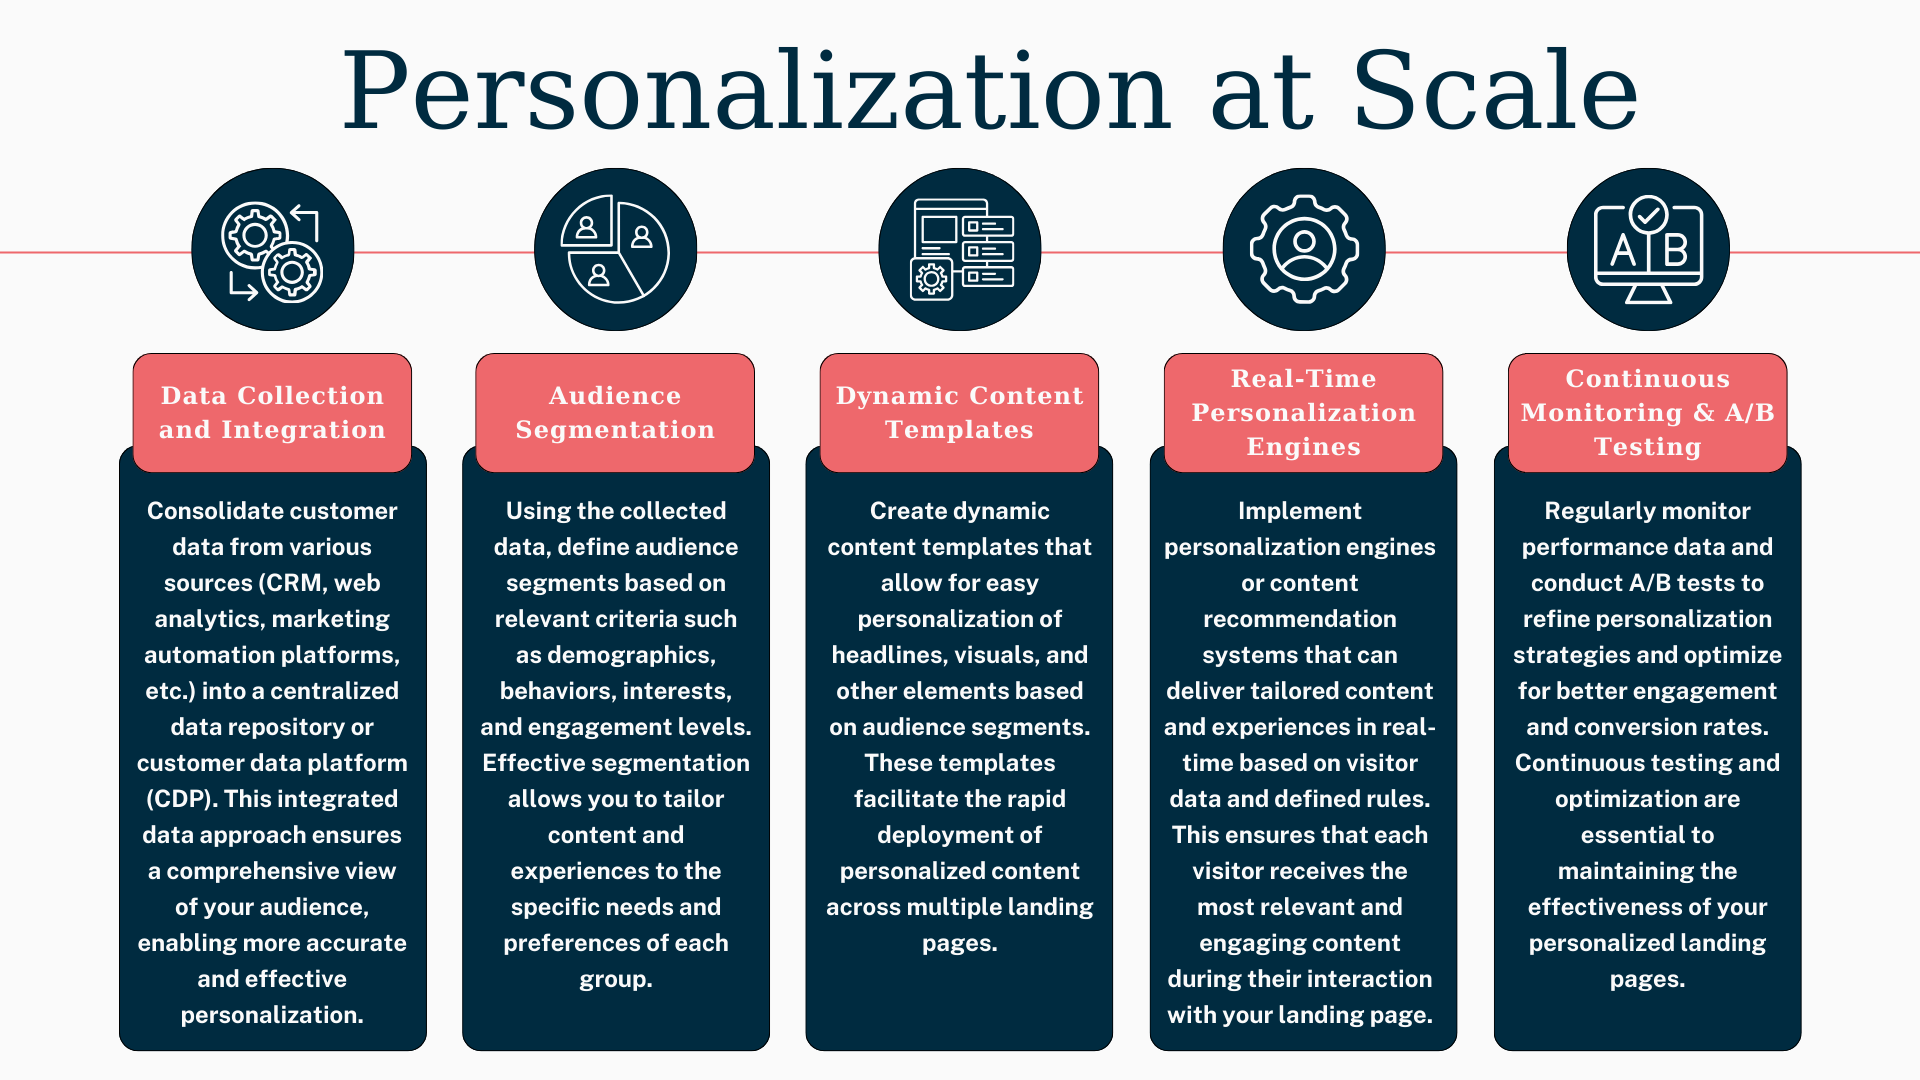 Personalization at Scale steps